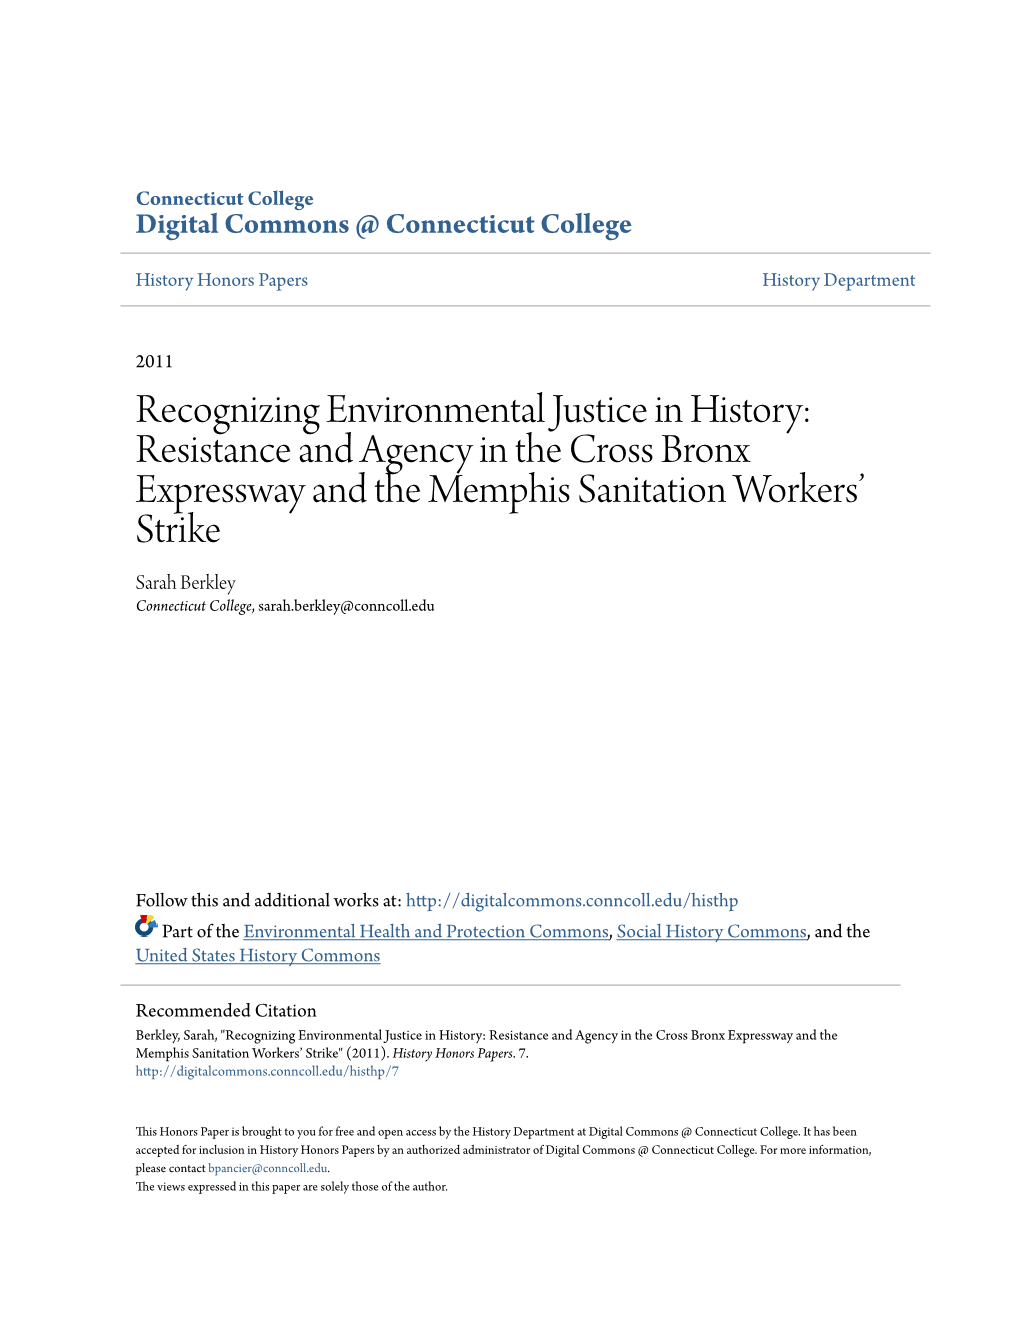 Recognizing Environmental Justice in History: Resistance And